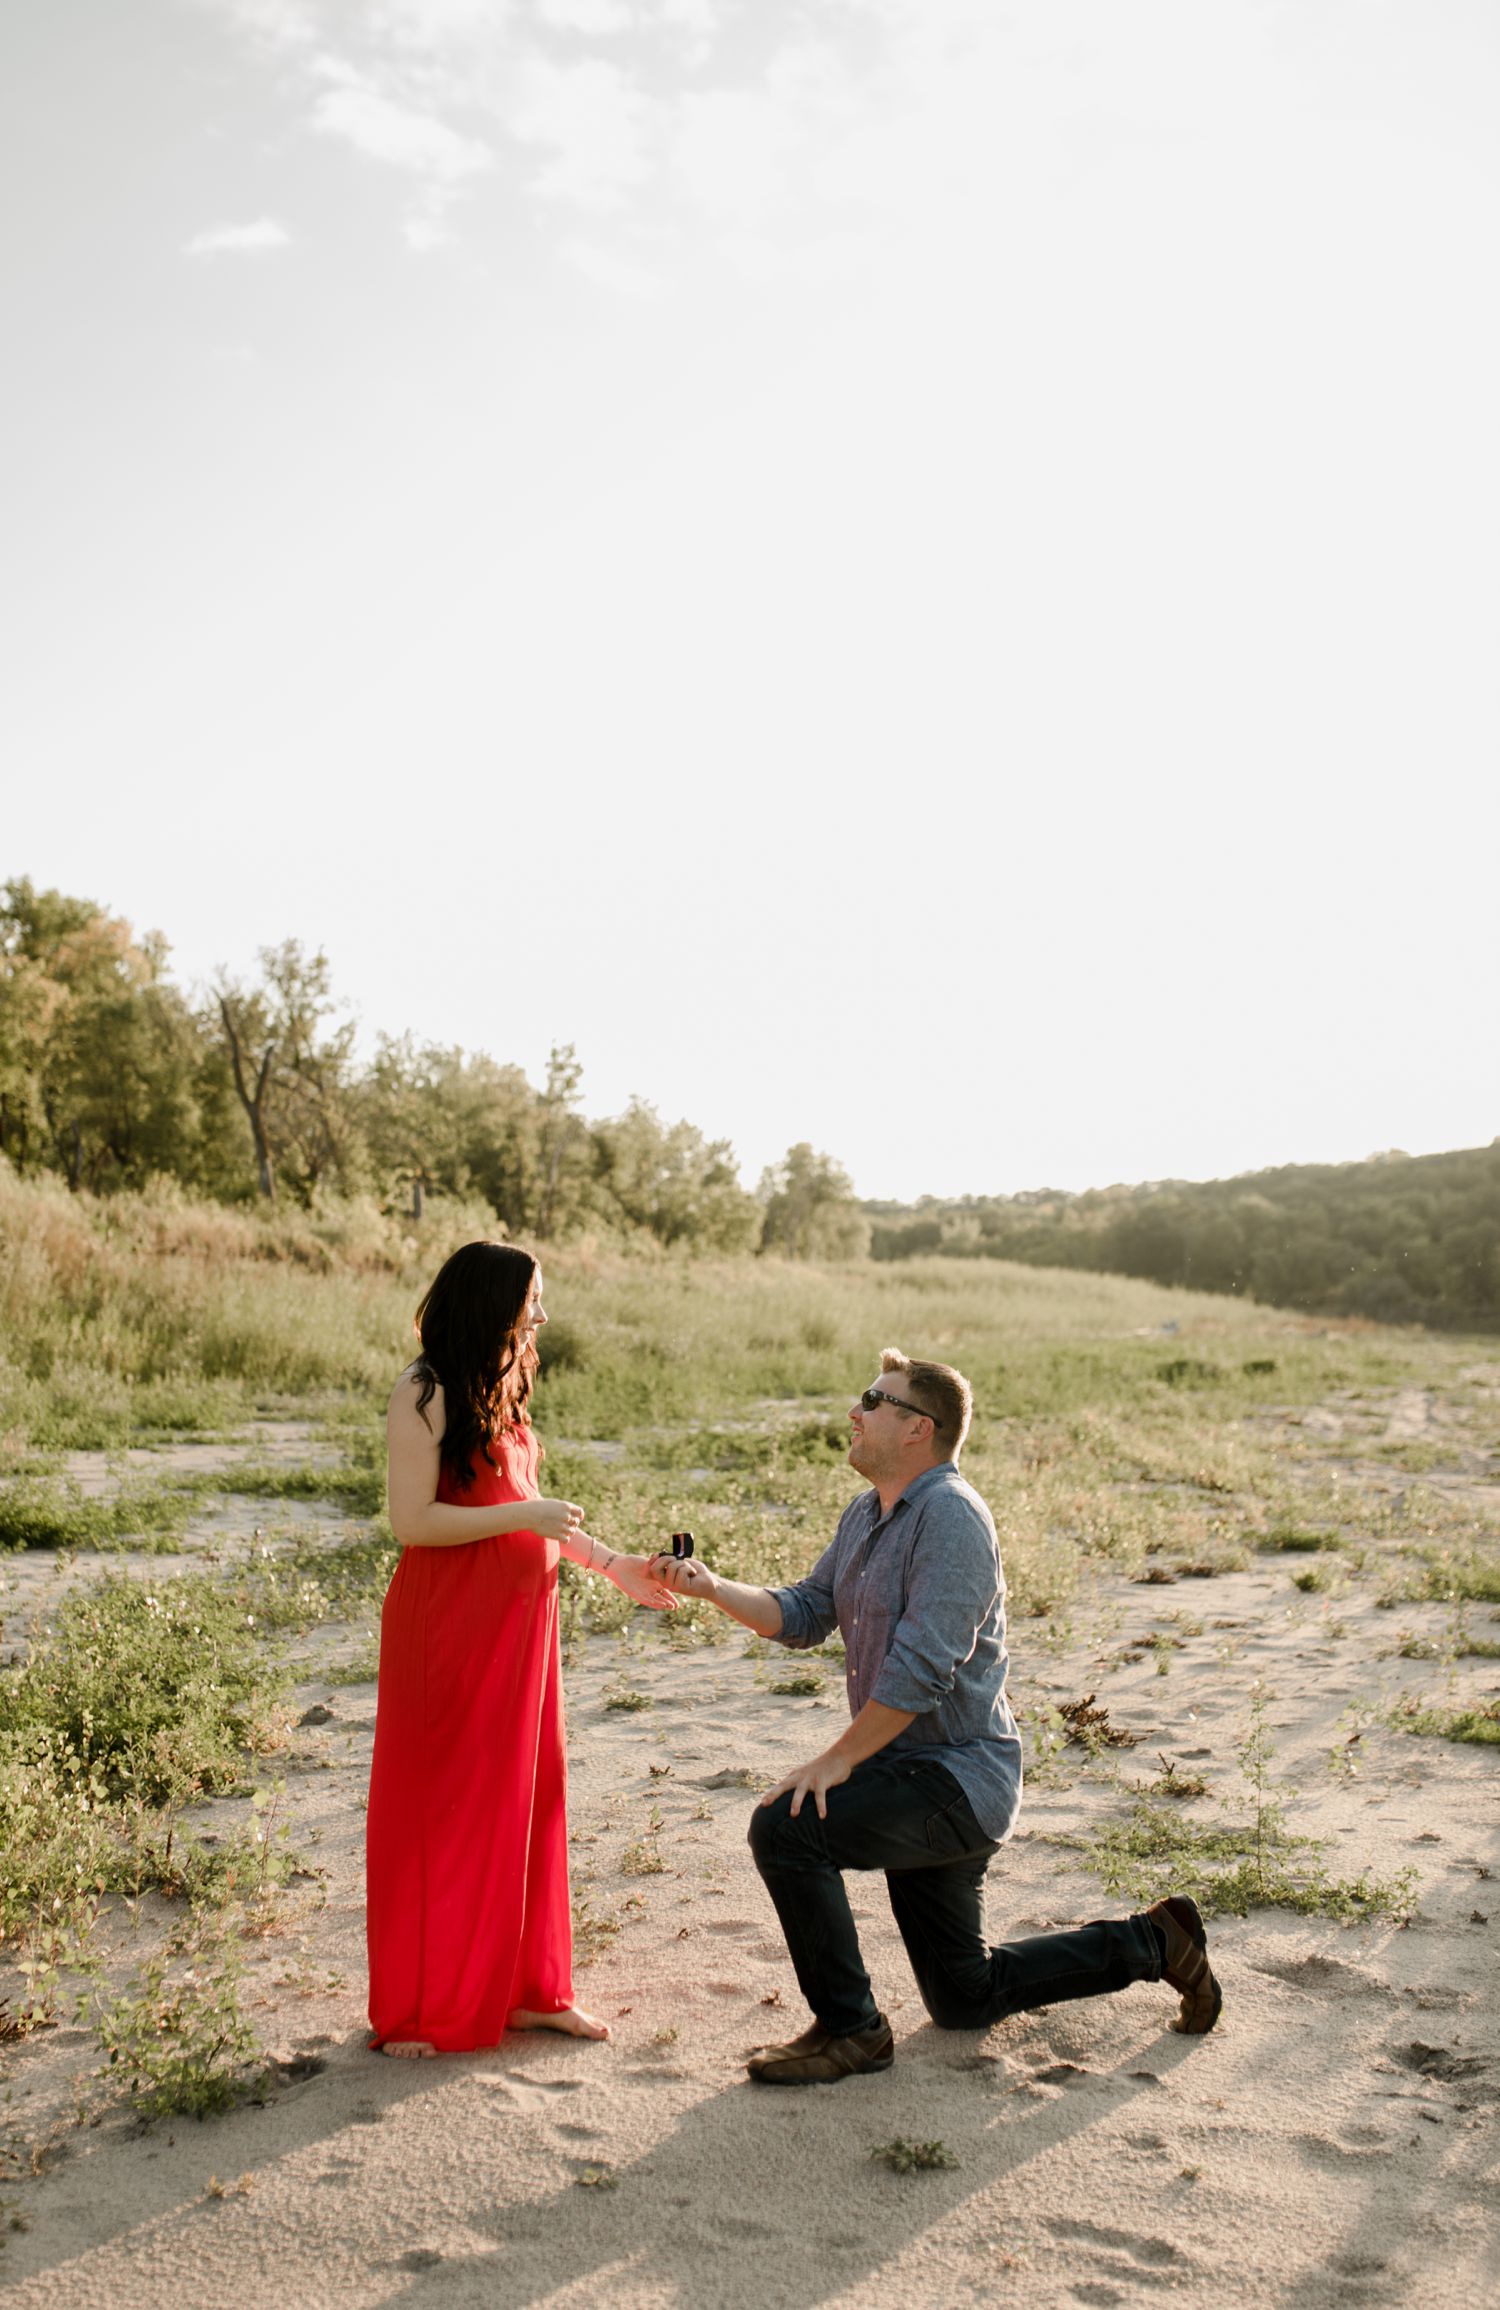 Manitoba maternity session & proposal, photographed by Vanessa Renae, a winnipeg wedding and elopement photographer. Jeff gets down on one knee to propose to Ali during their maternity session!